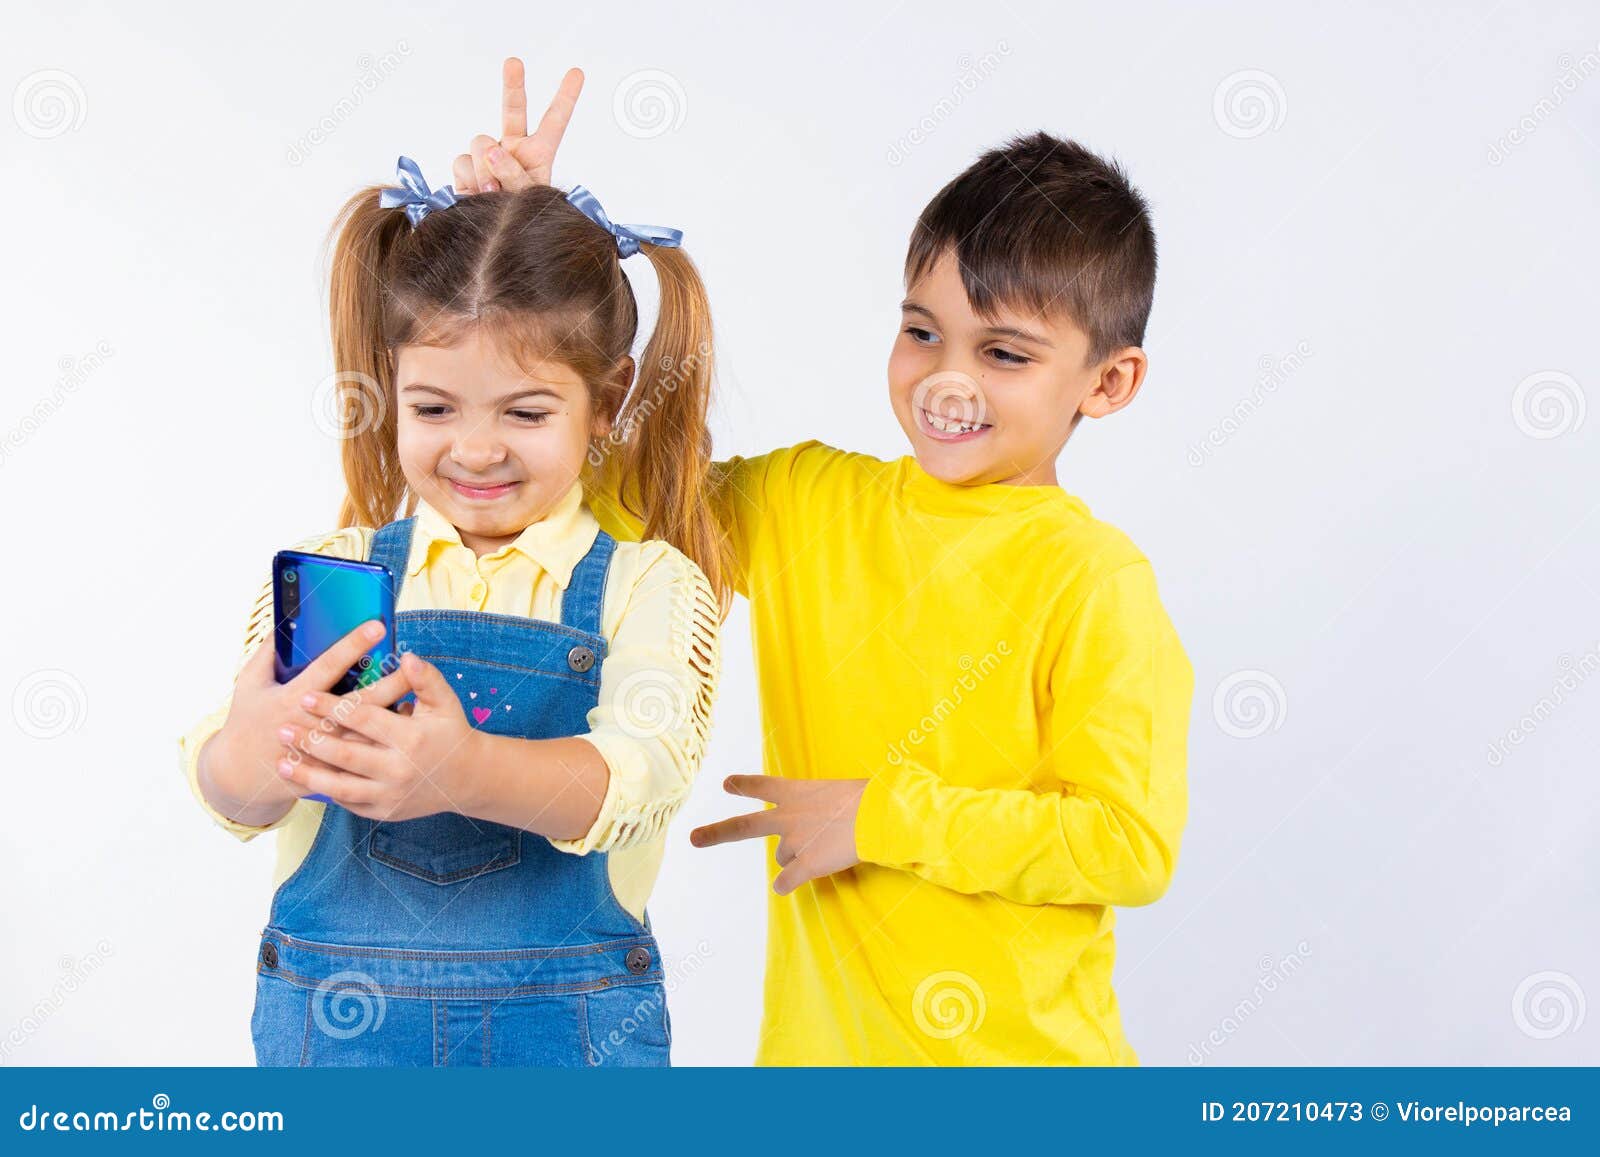 Preschool Kids Take a Selfie on a Smartphone. the Boy Puts Horns To the ...